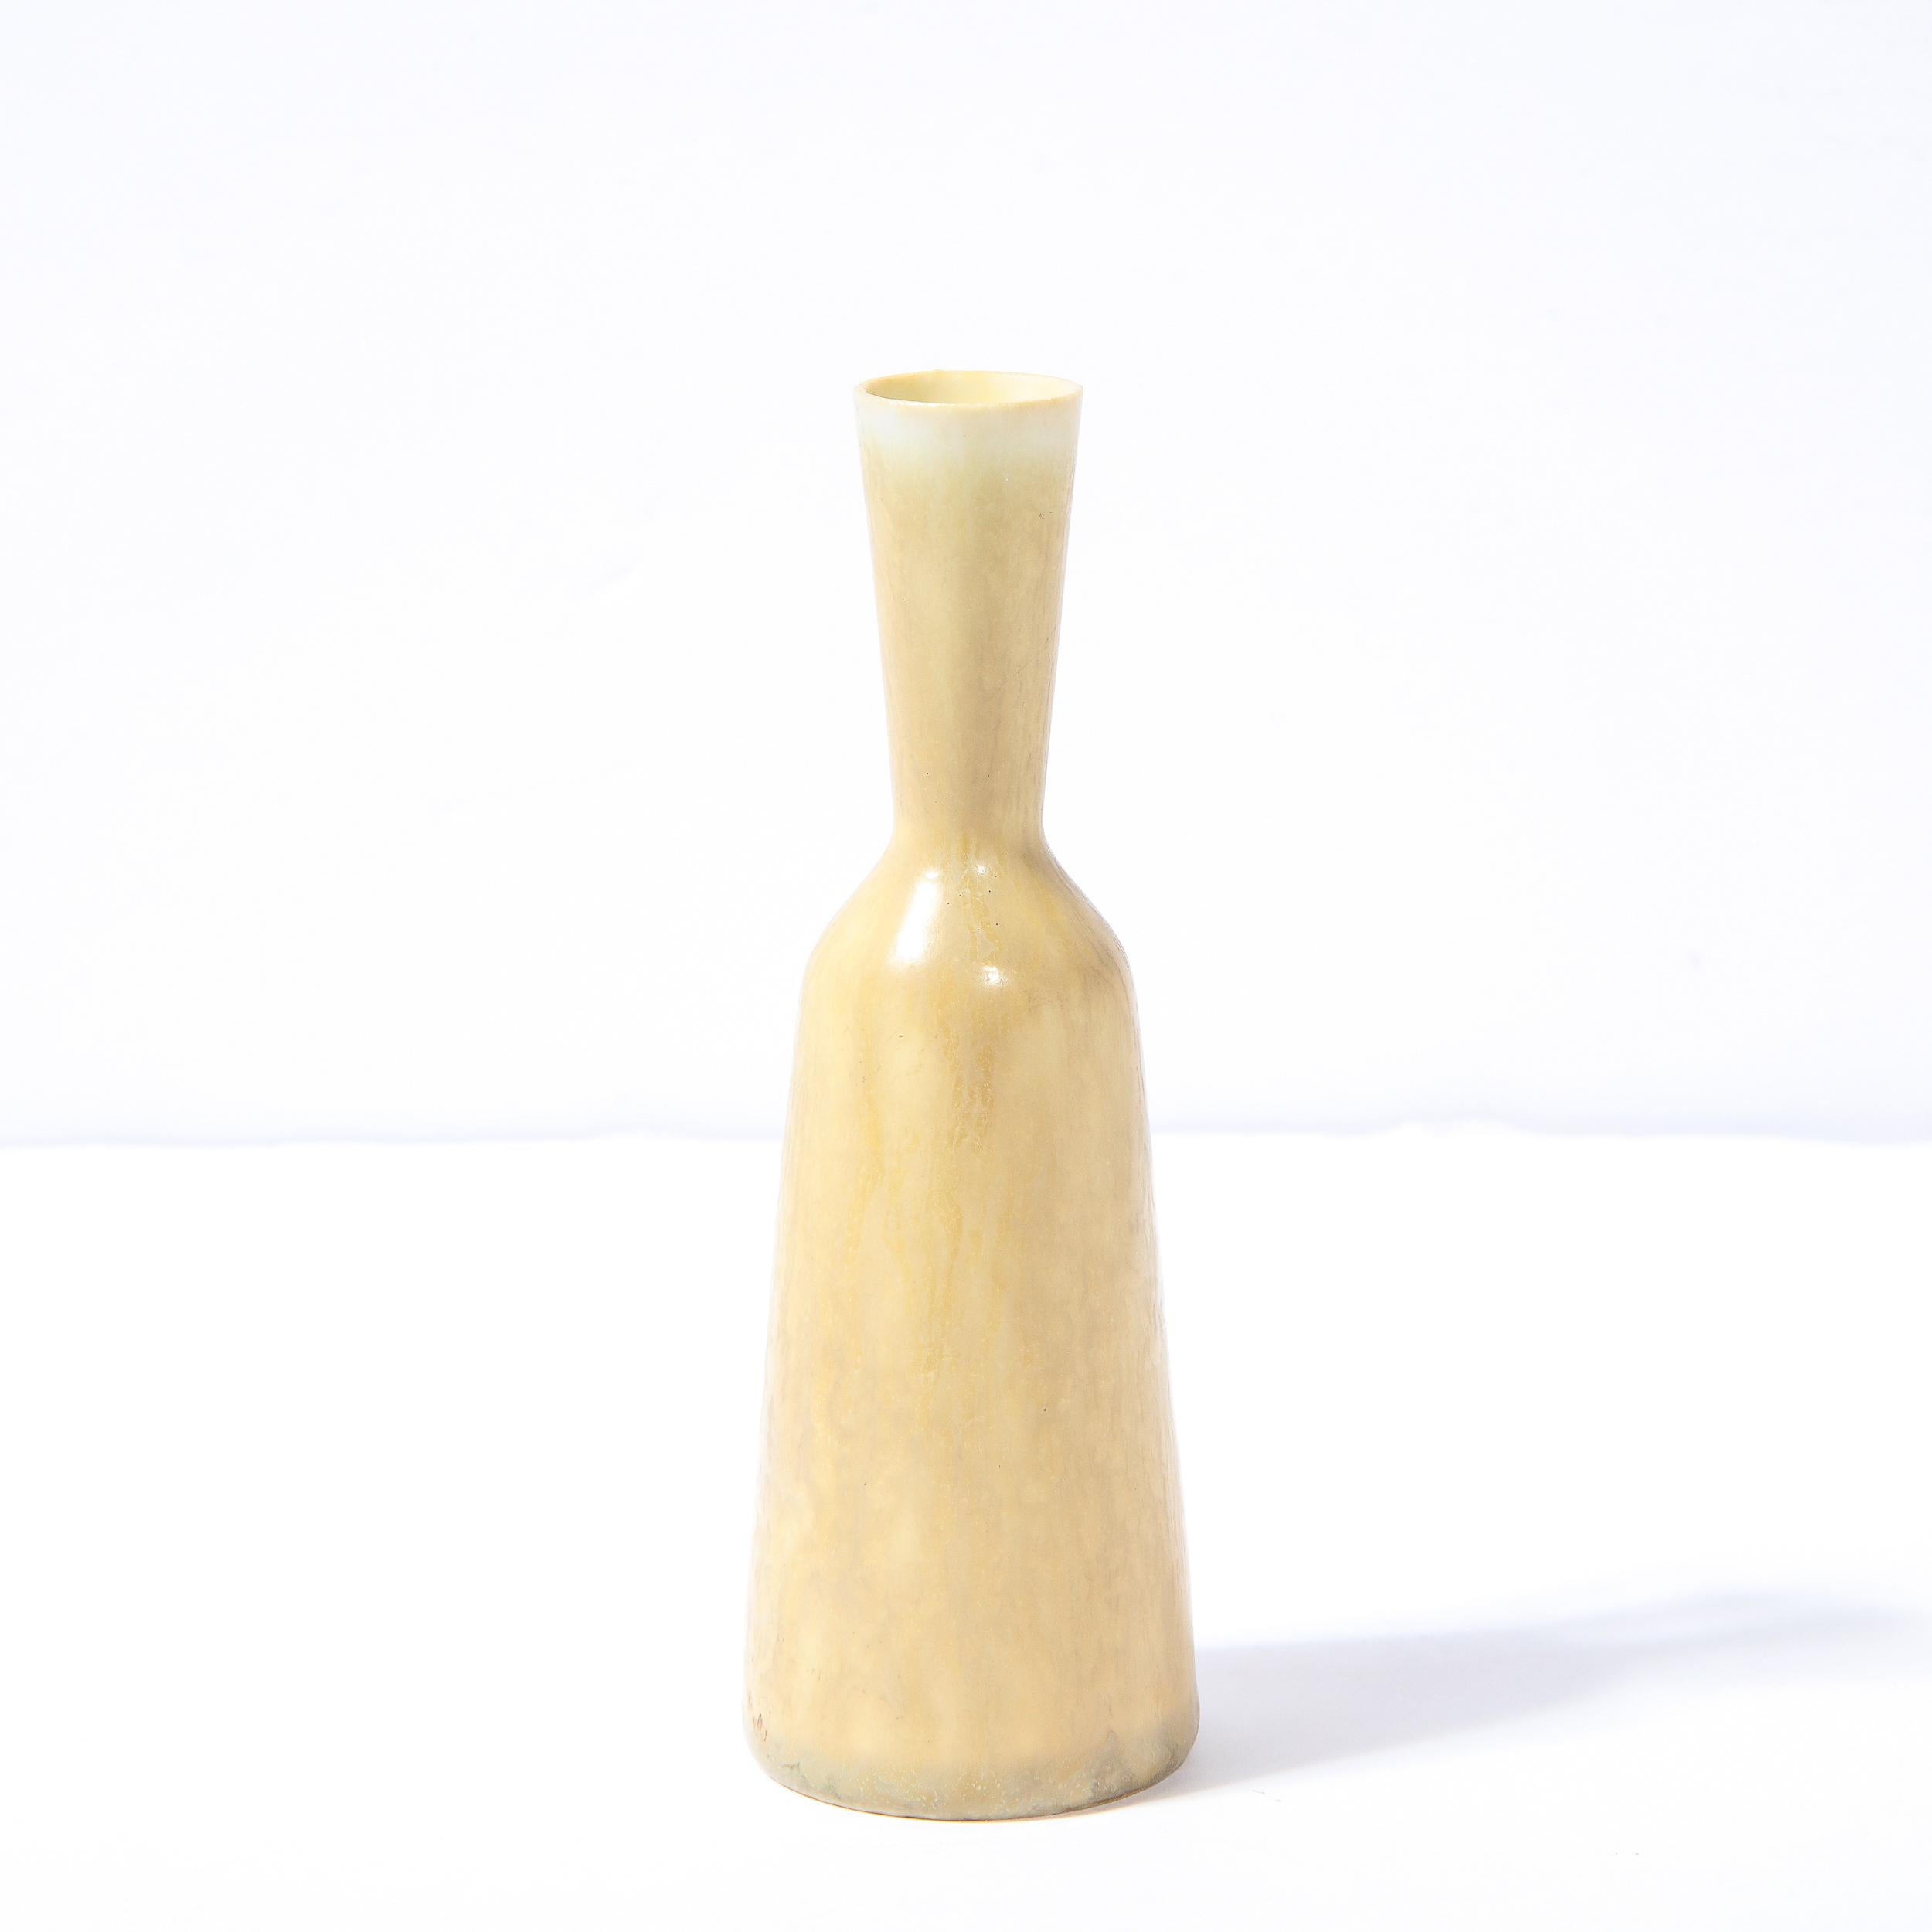 This elegant Mid-Century Modern vase was realized by Gunnar Nylund for Rorstrand in Sweden circa 1960. It features an hourglass form tapered body in glazed ceramic in a sophisticated sand hue with a sculptural handle and a flared neck culminating in